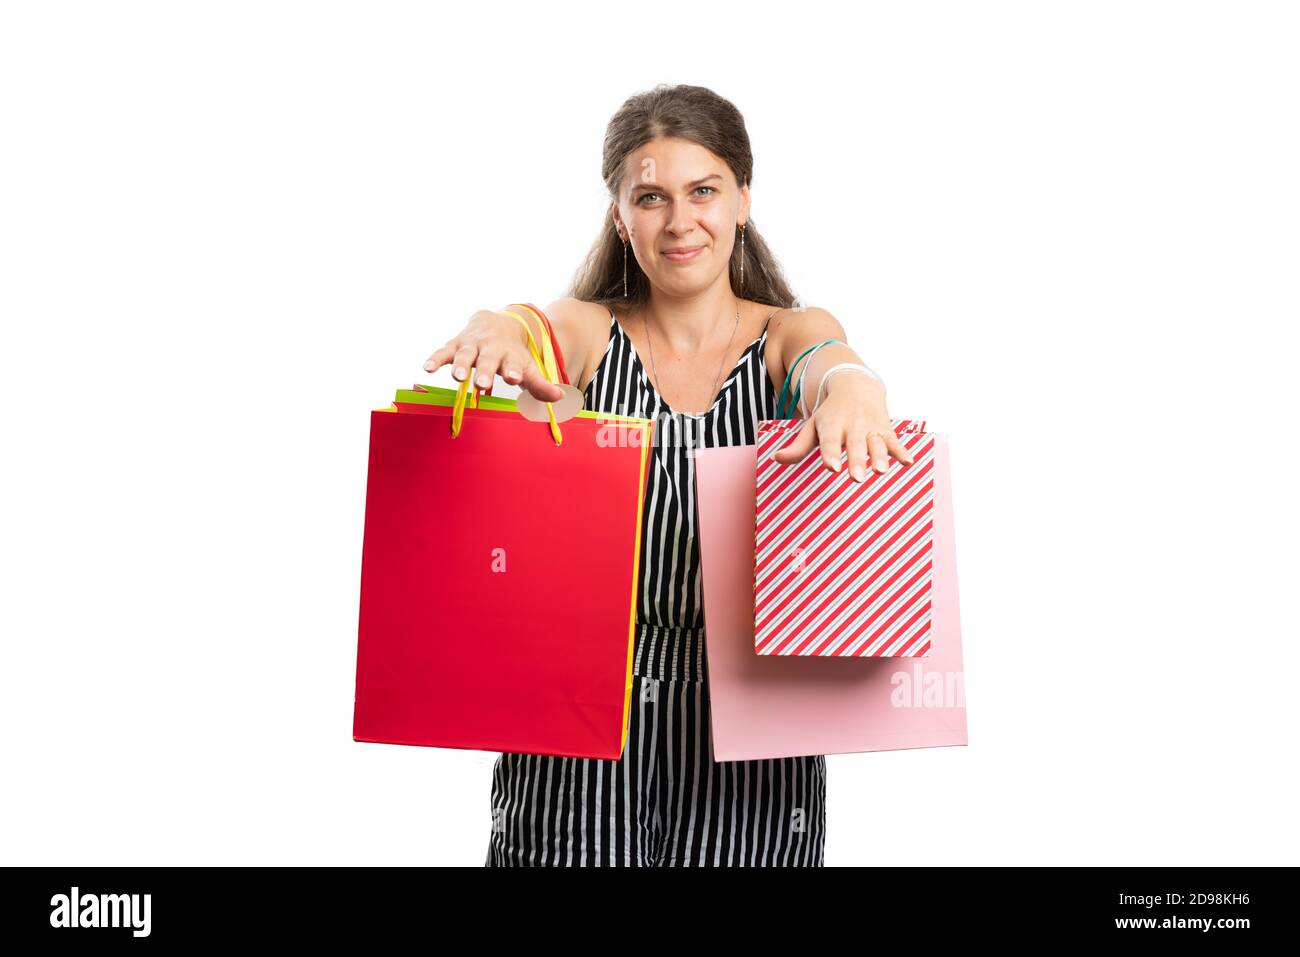 Adult woman model presenting shopping bags on hands wearing stylish summer clothing outfit as shopaholic consumerism lifestyle concept isolated on whi Stock Photo